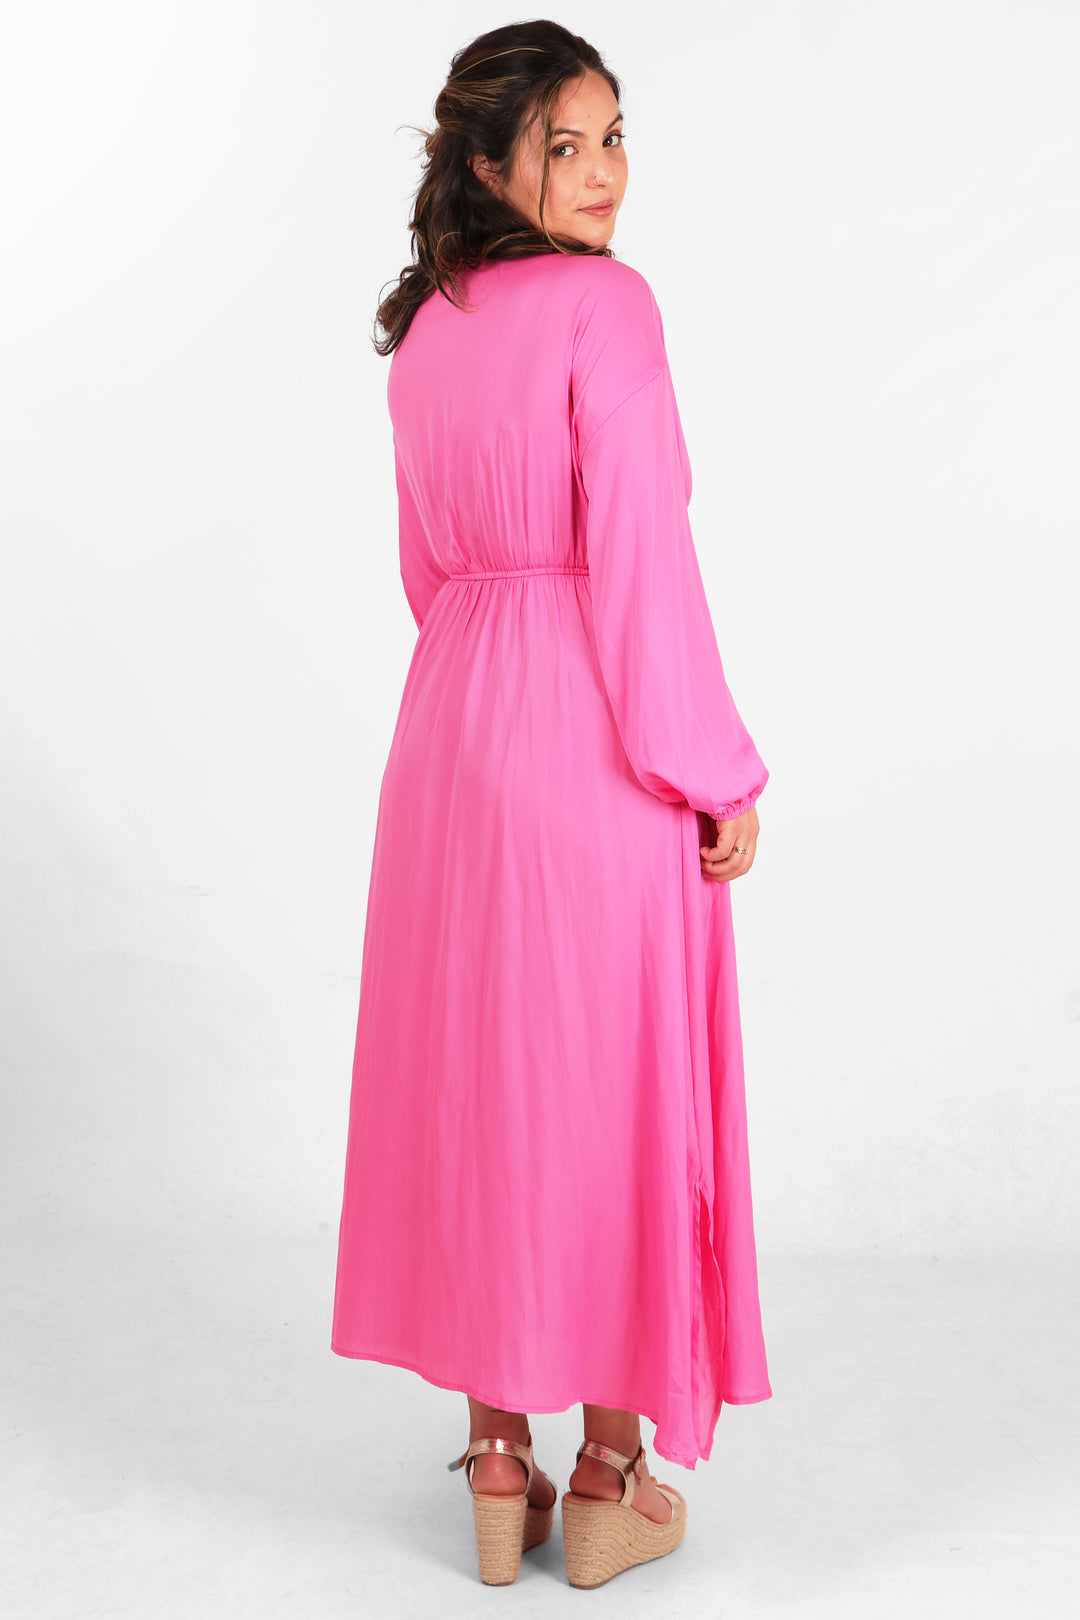 model showing the back of the dress, showing an all over solid pink colour